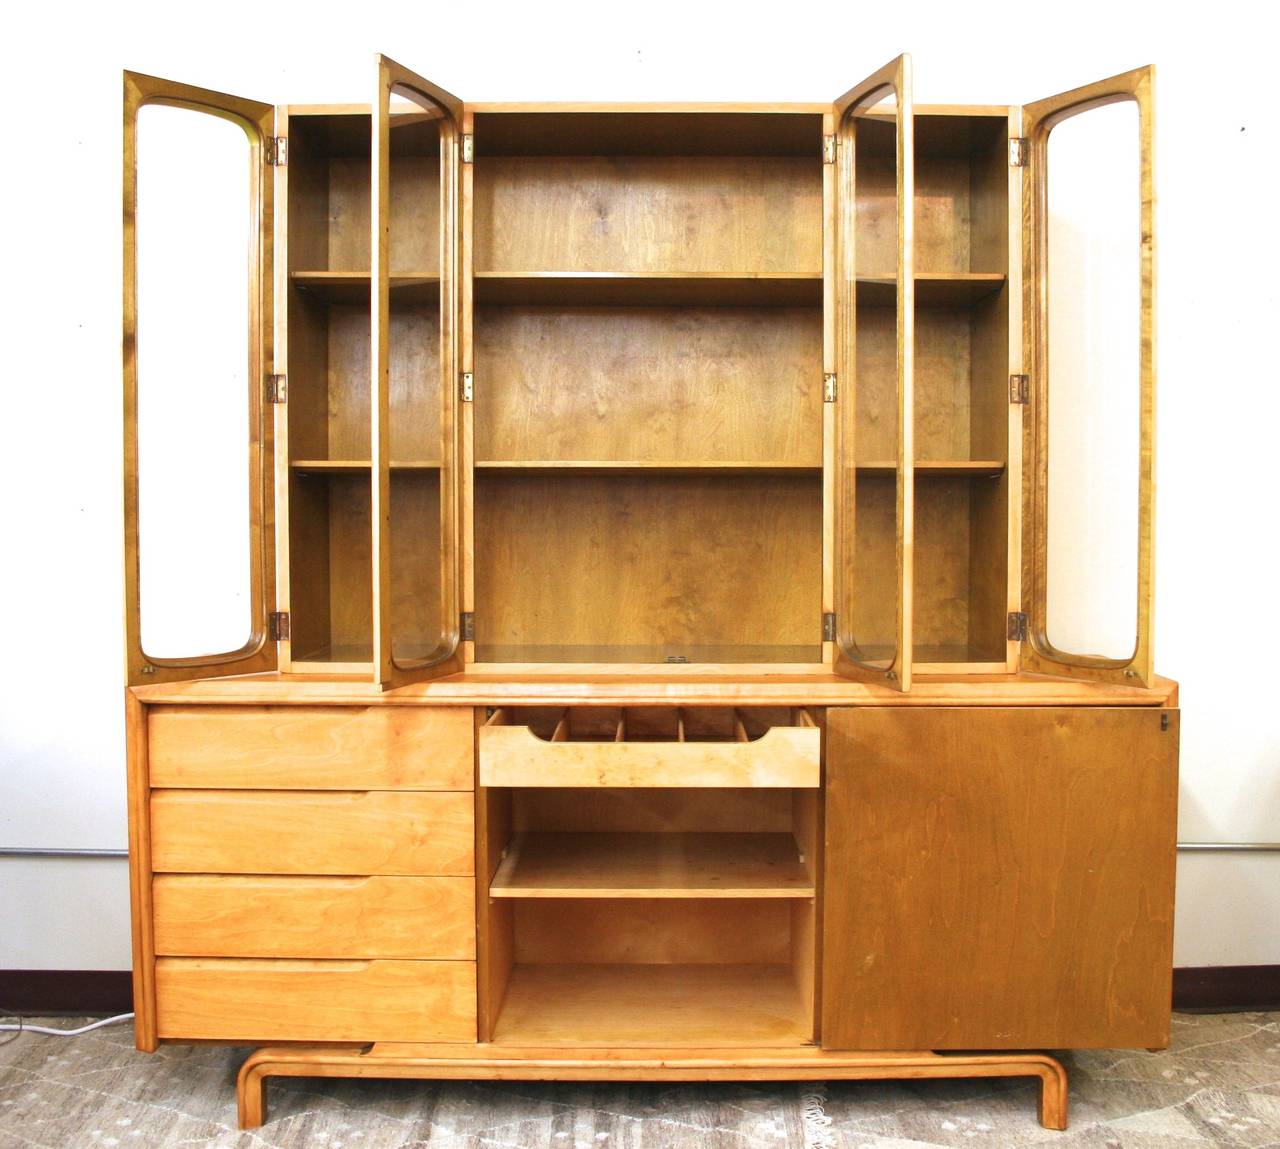 Swedish Sideboard with Hutch Made in Sweden in the Style of Edmond Spence, circa 1960